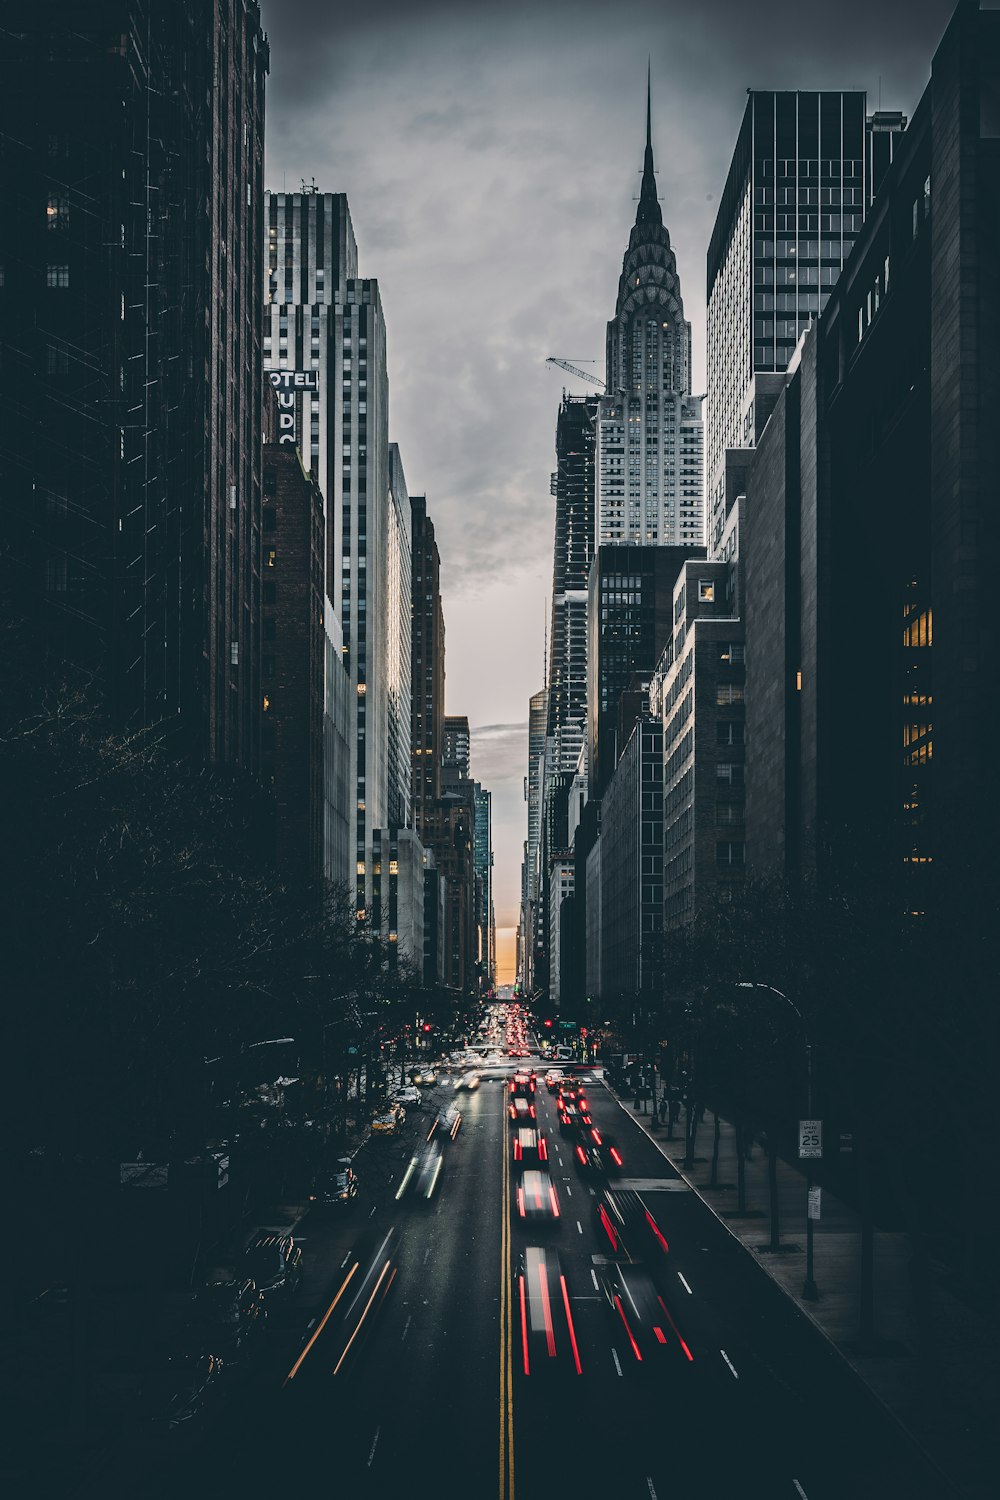 1500+ Urban Iphone Wallpaper Pictures | Download Free Images on Unsplash